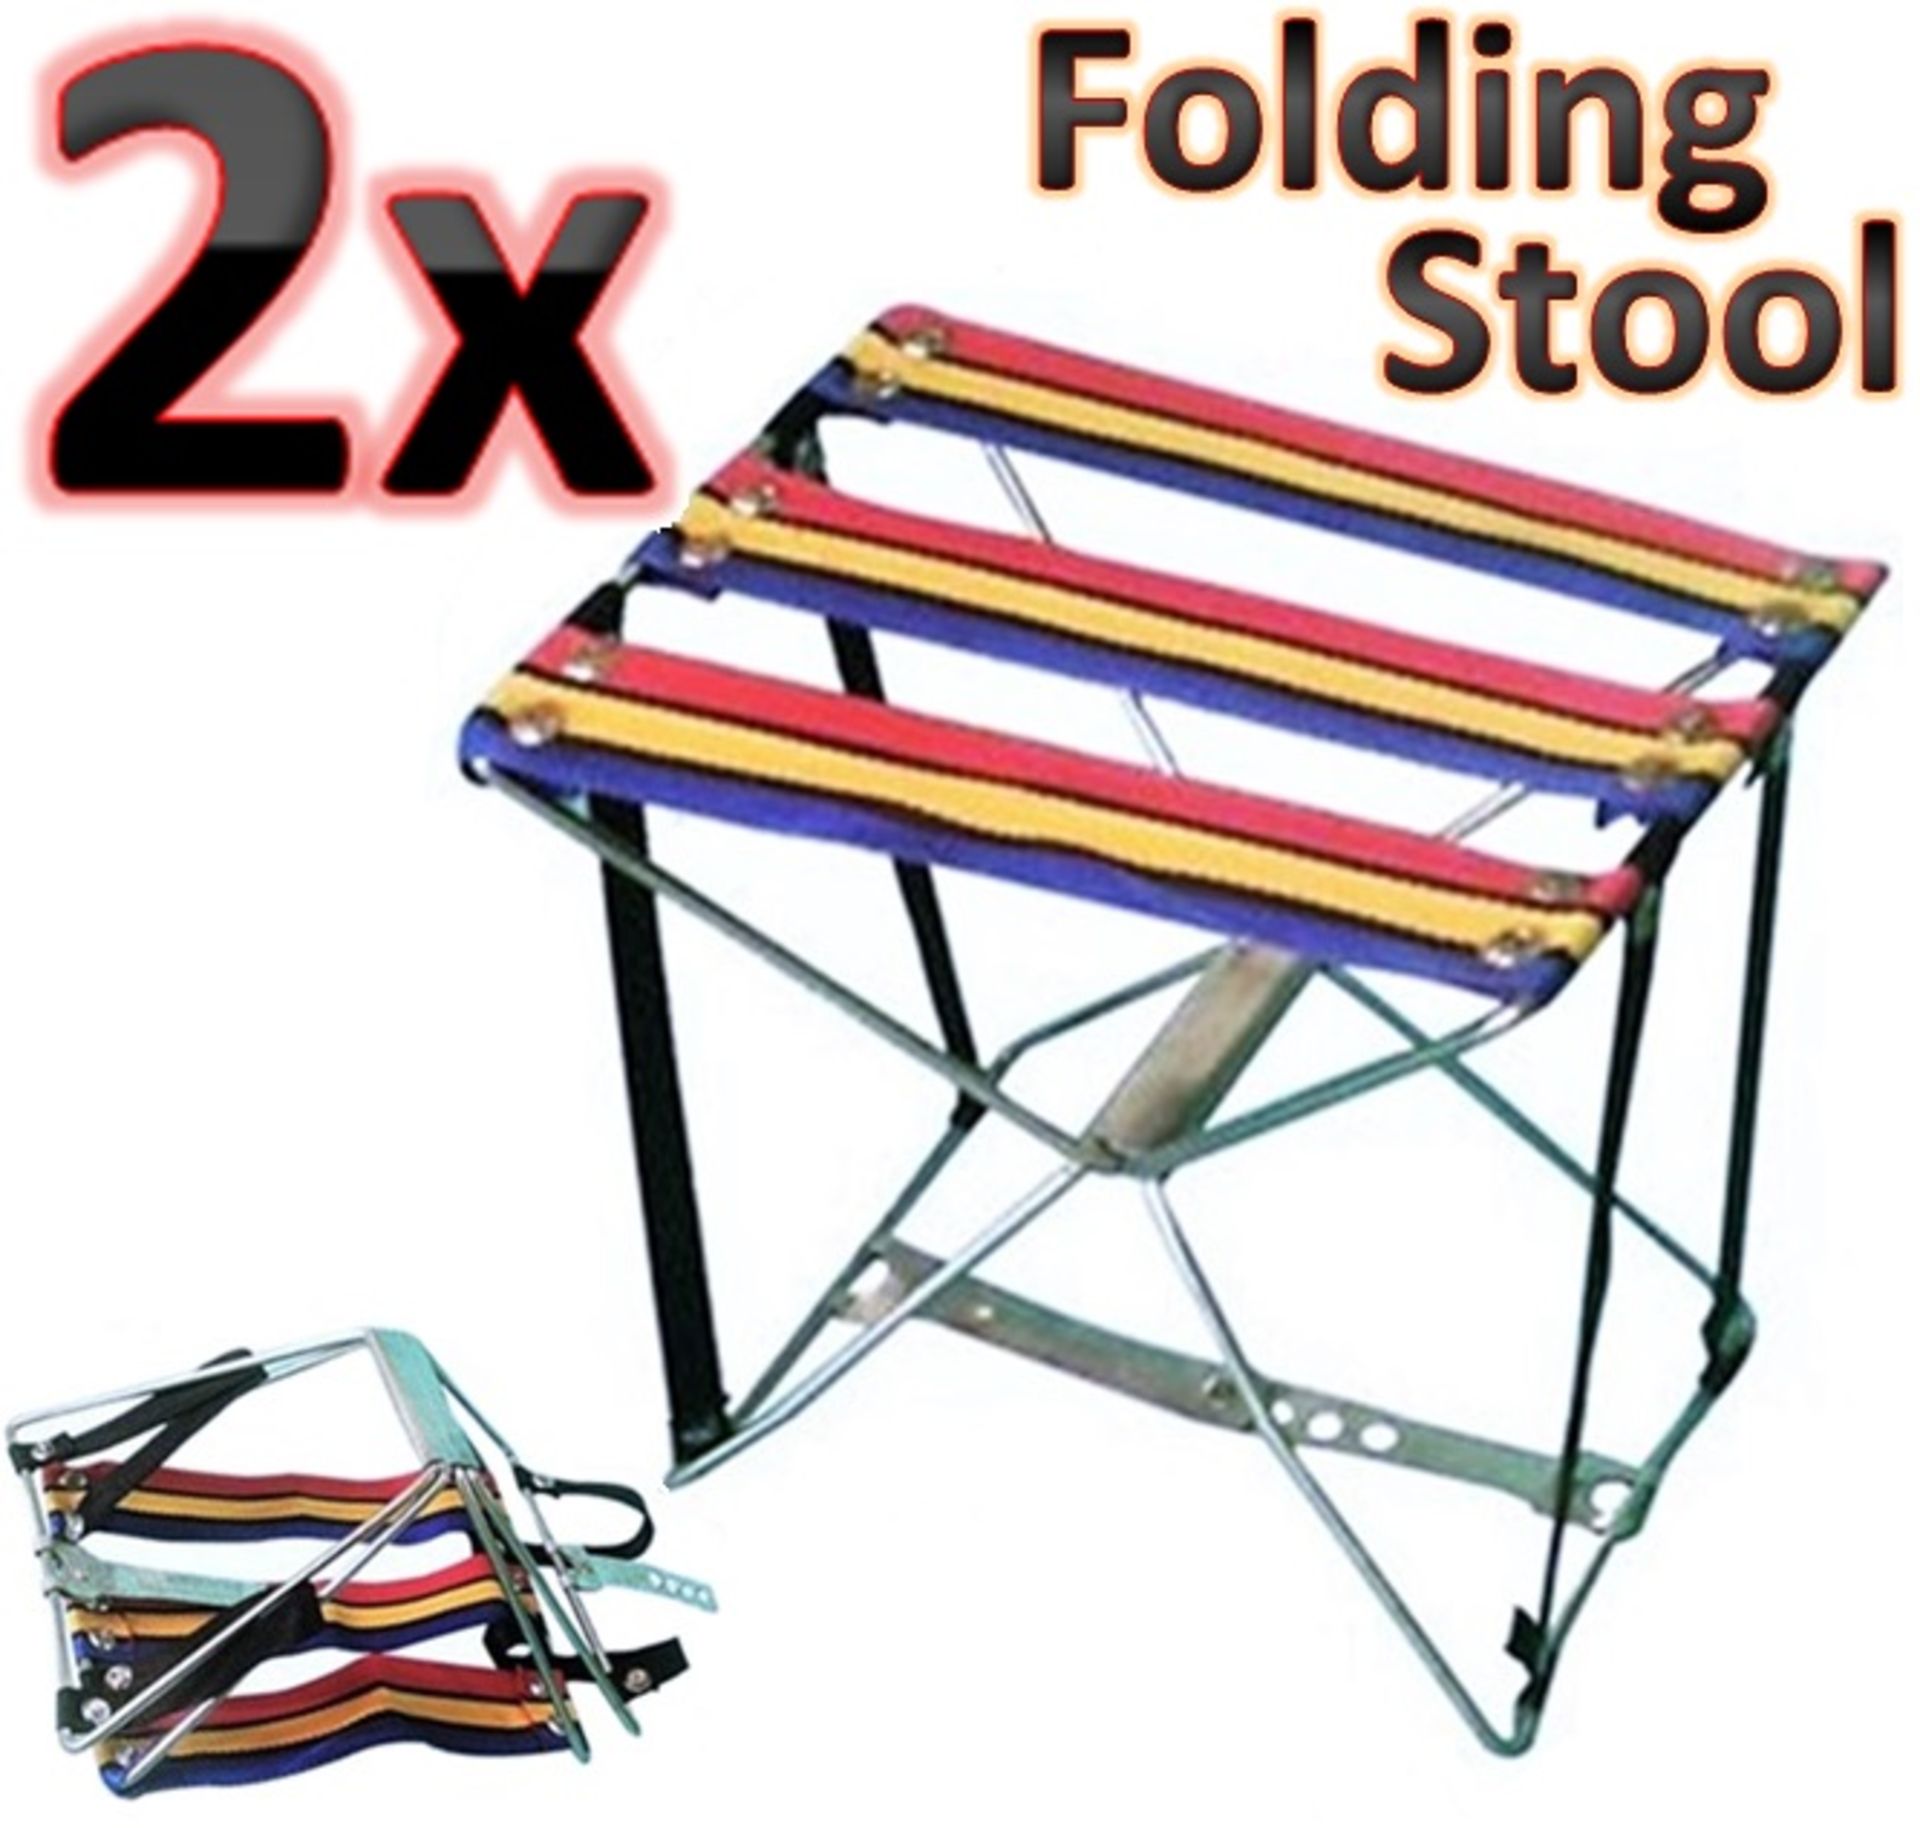 2x pcs Folding up Seats - Fold Away Chairs Metal Frame with Colourful Textile Slats - suitable for